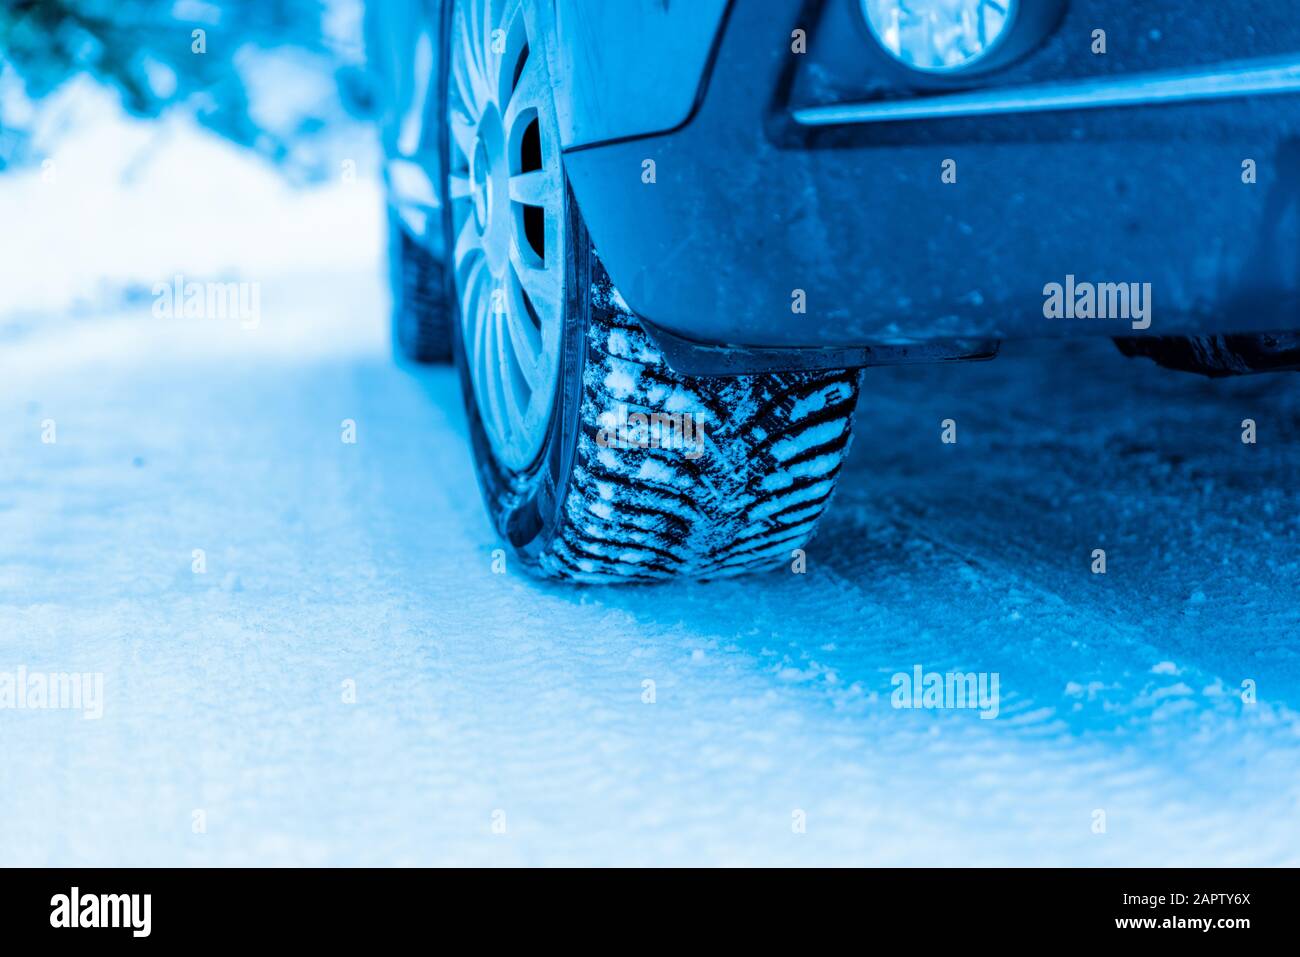 Winter tire on a vehicle on a snowy surface. Close-up Stock Photo